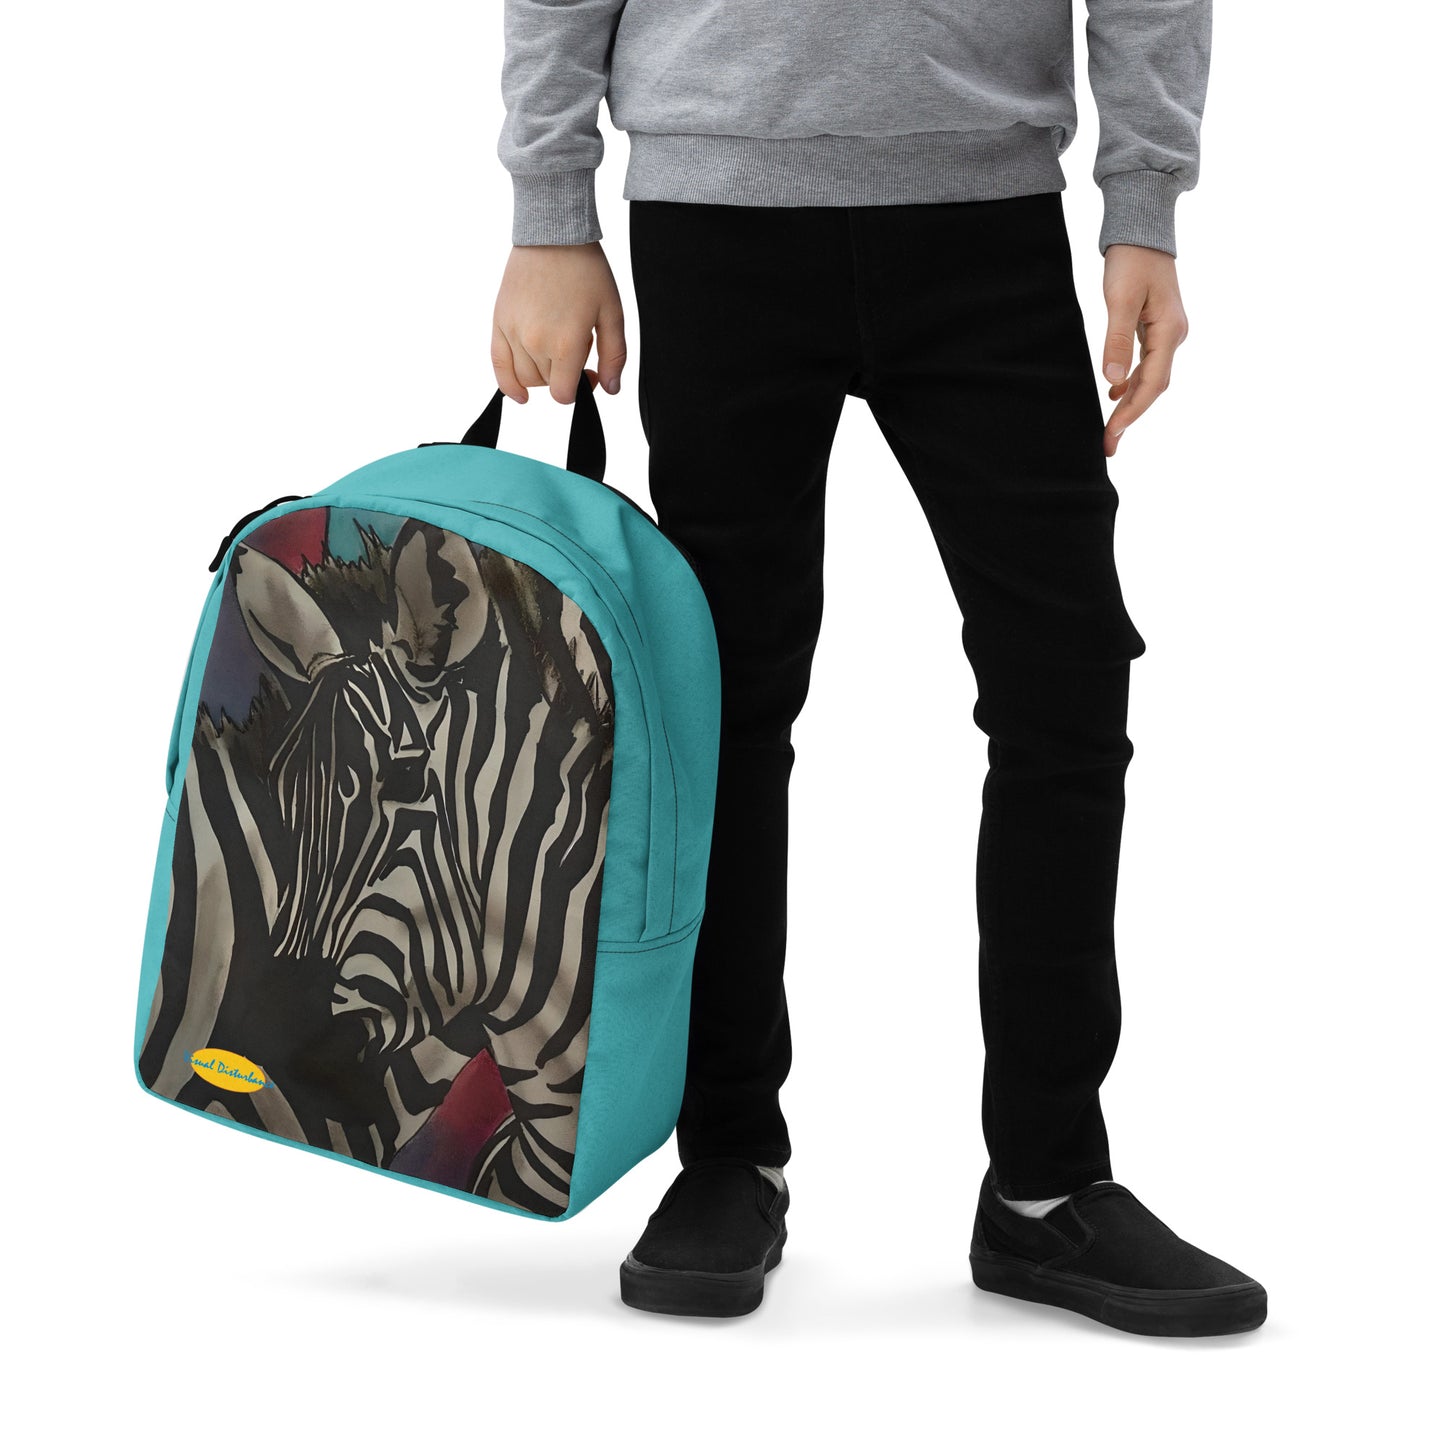 Zebra in the Sun with Teal Minimalist Backpack